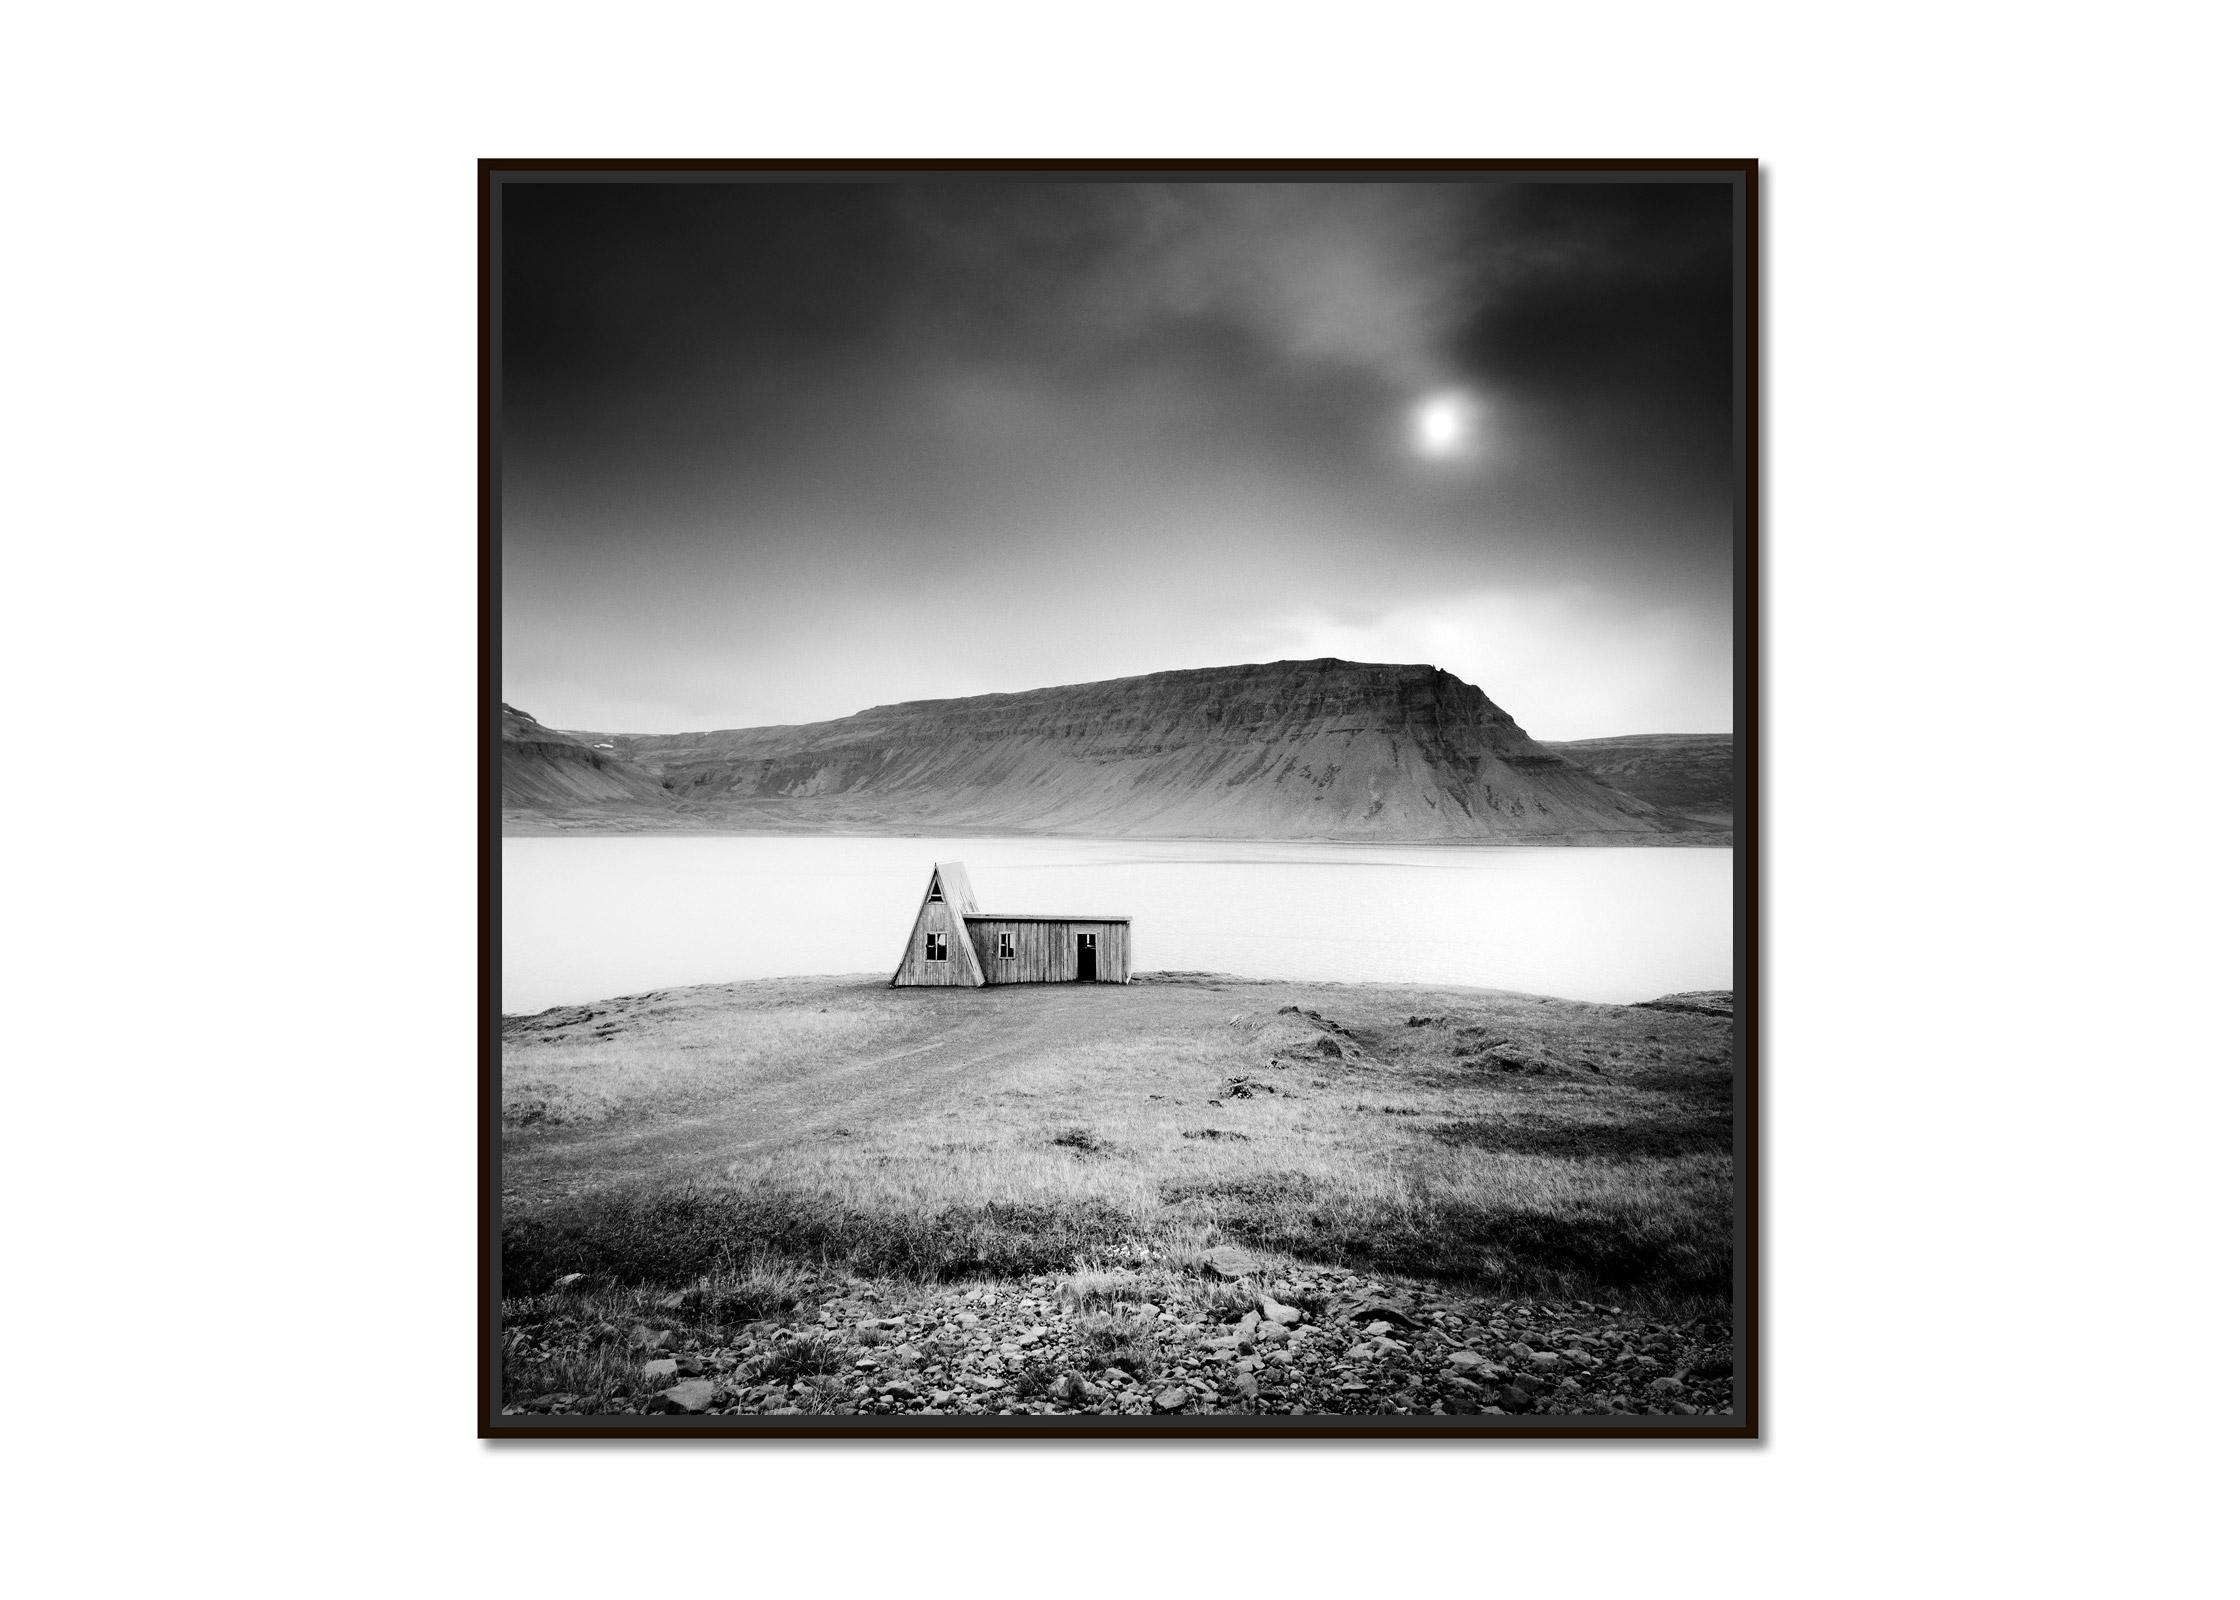 Abandoned Farmhouse, Iceland, black and white photography, landscape, fine art - Photograph by Gerald Berghammer